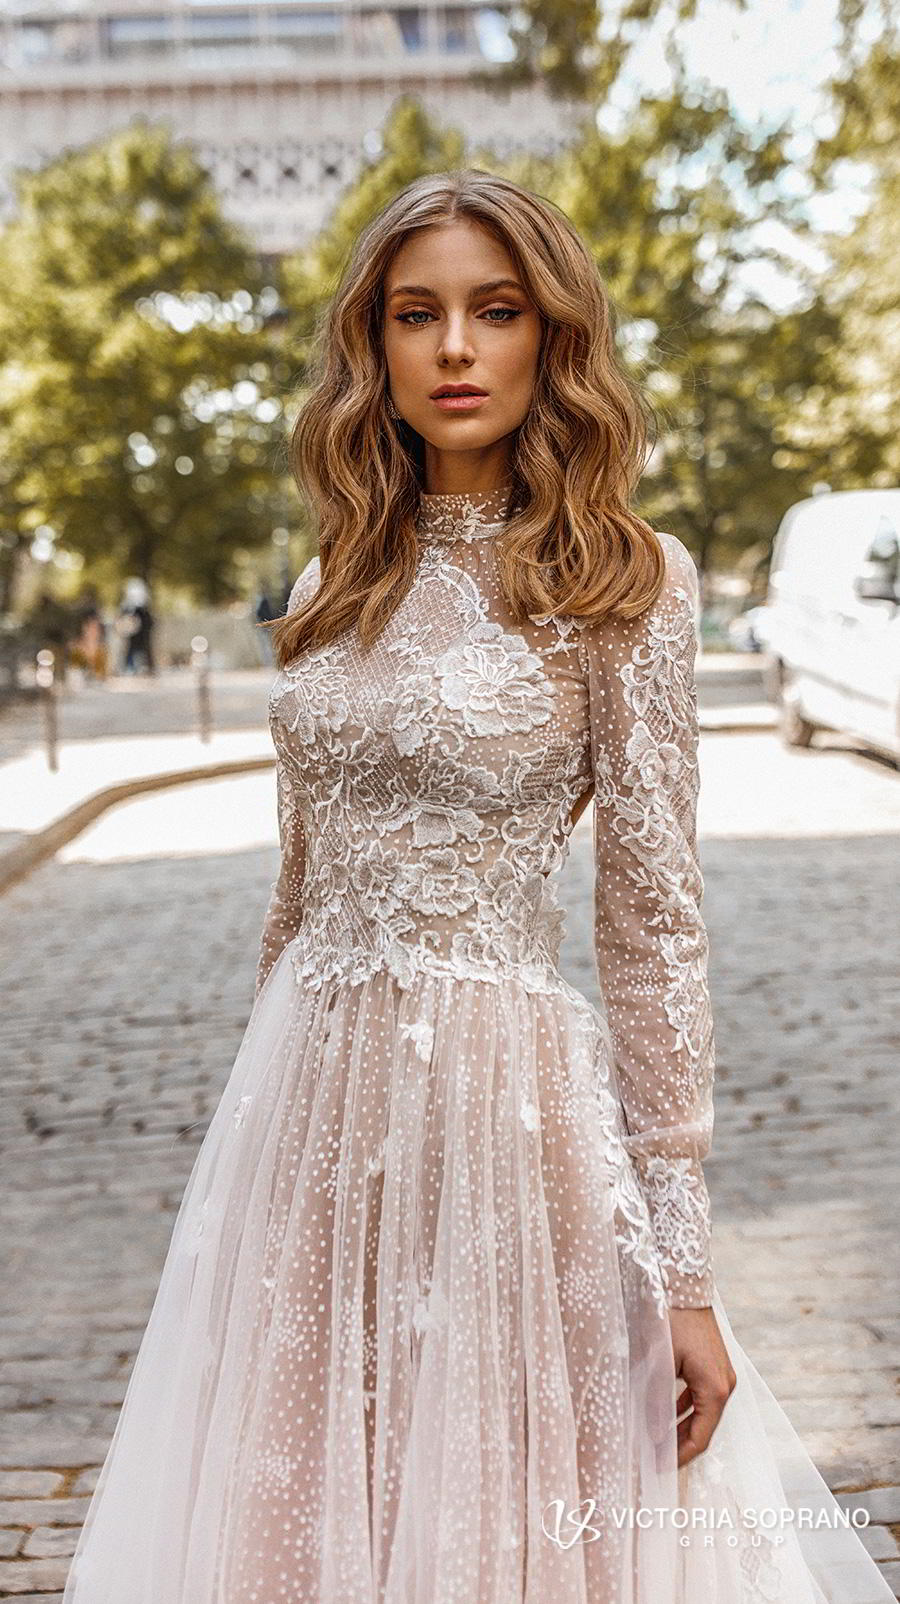 These Victoria  Soprano  Wedding  Dresses  Will Make You Swoon 